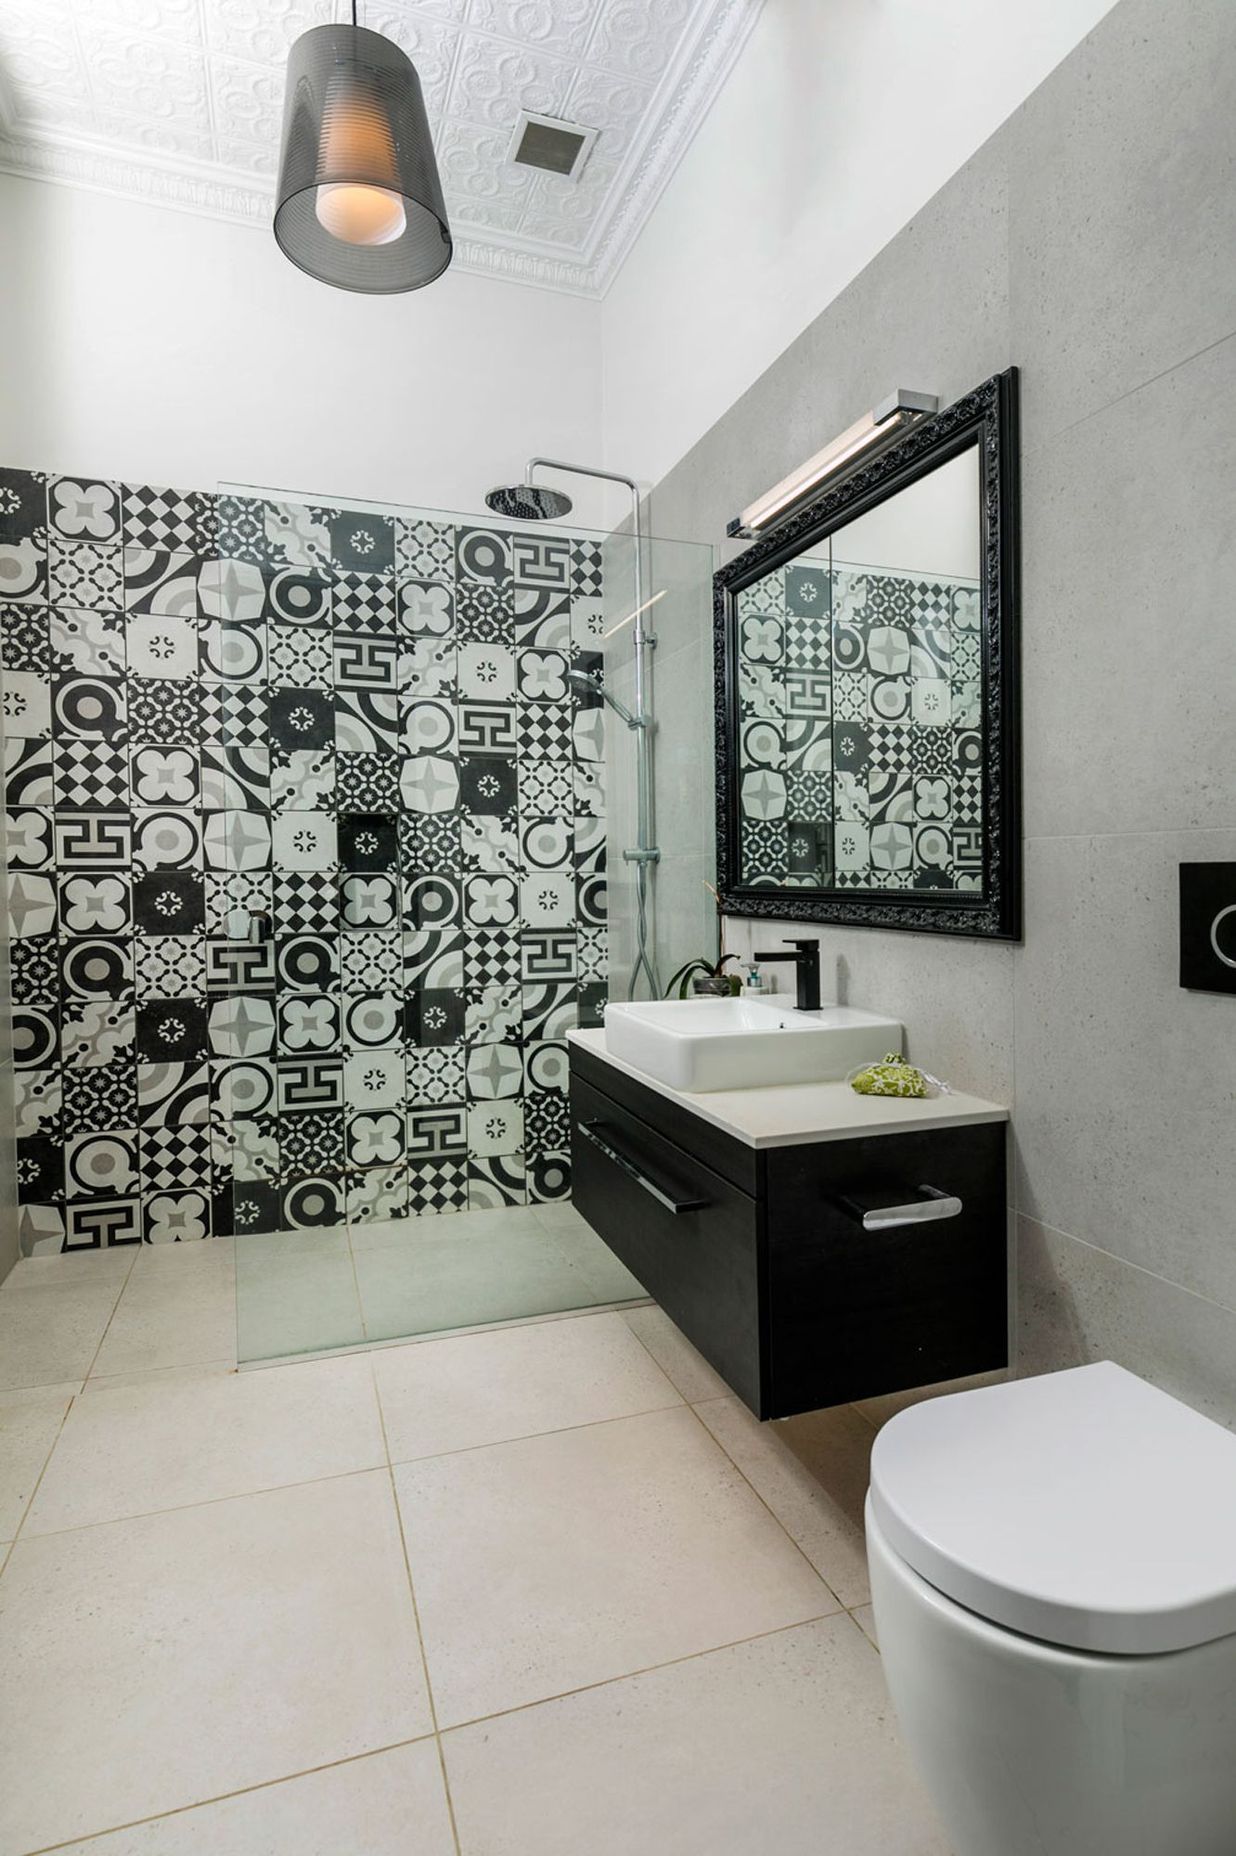 Bold patterns tiles created a feature in the bathrooms, and the mirror was designed with a picture frame around it to create a difference to the ordinary recessed mirror cabinet.